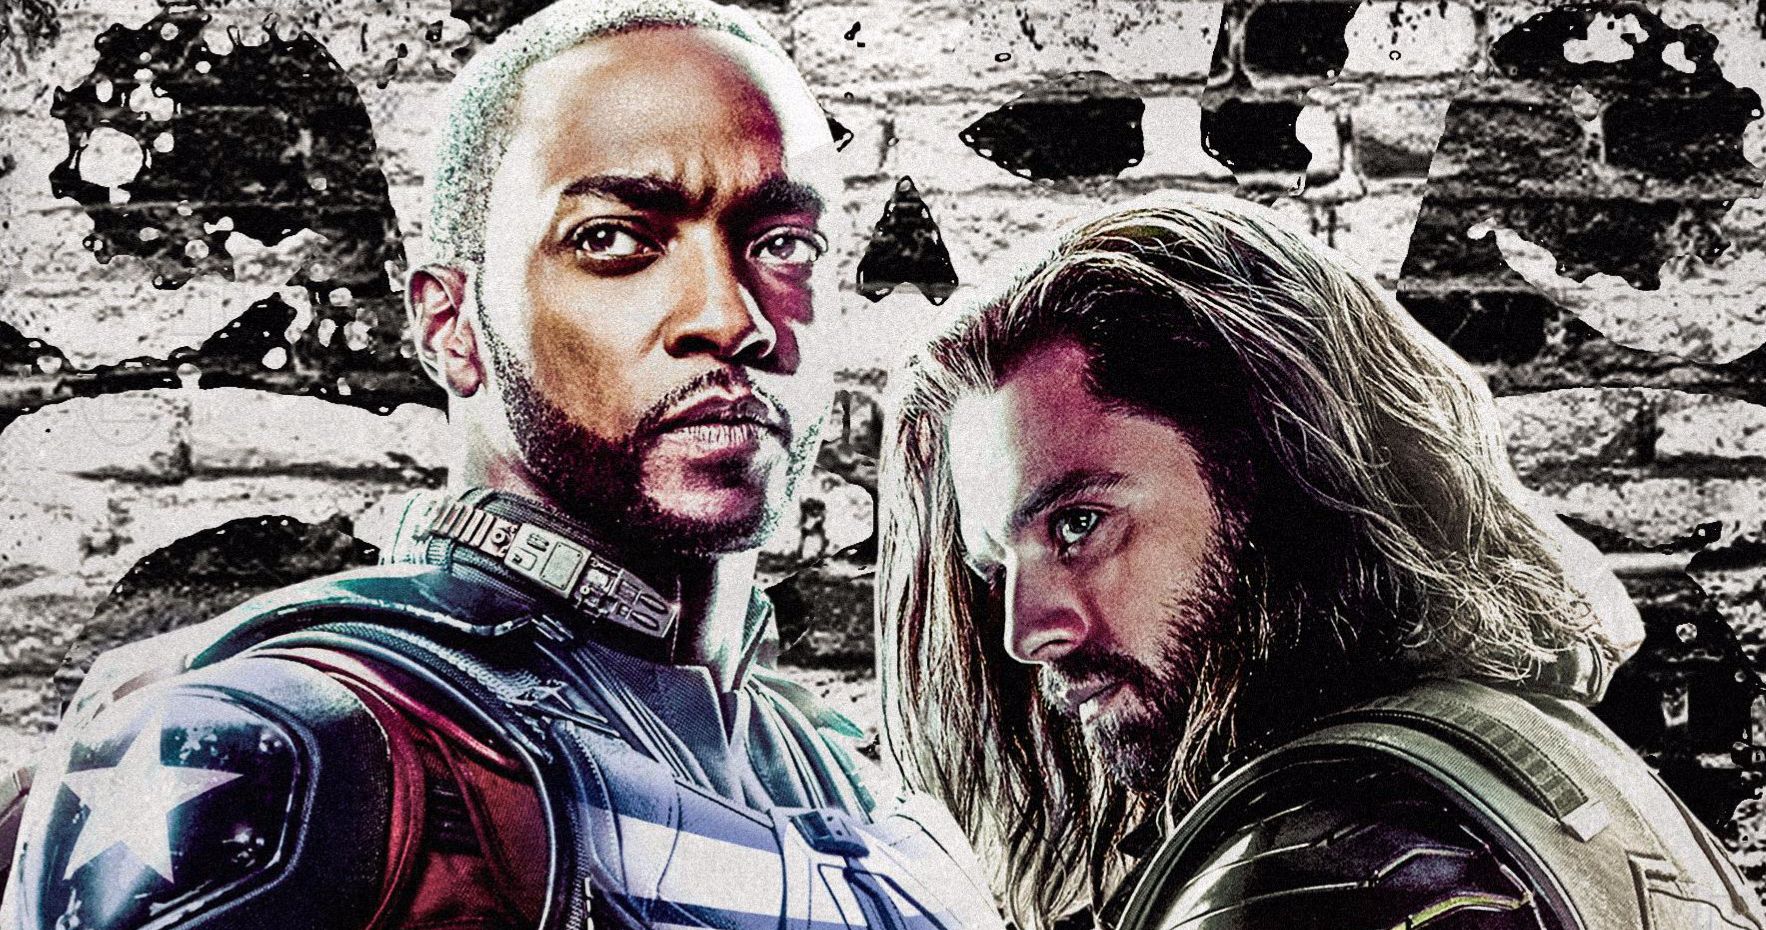 The Falcon and the Winter Soldier Disney+ Series Begins Shooting Very Soon